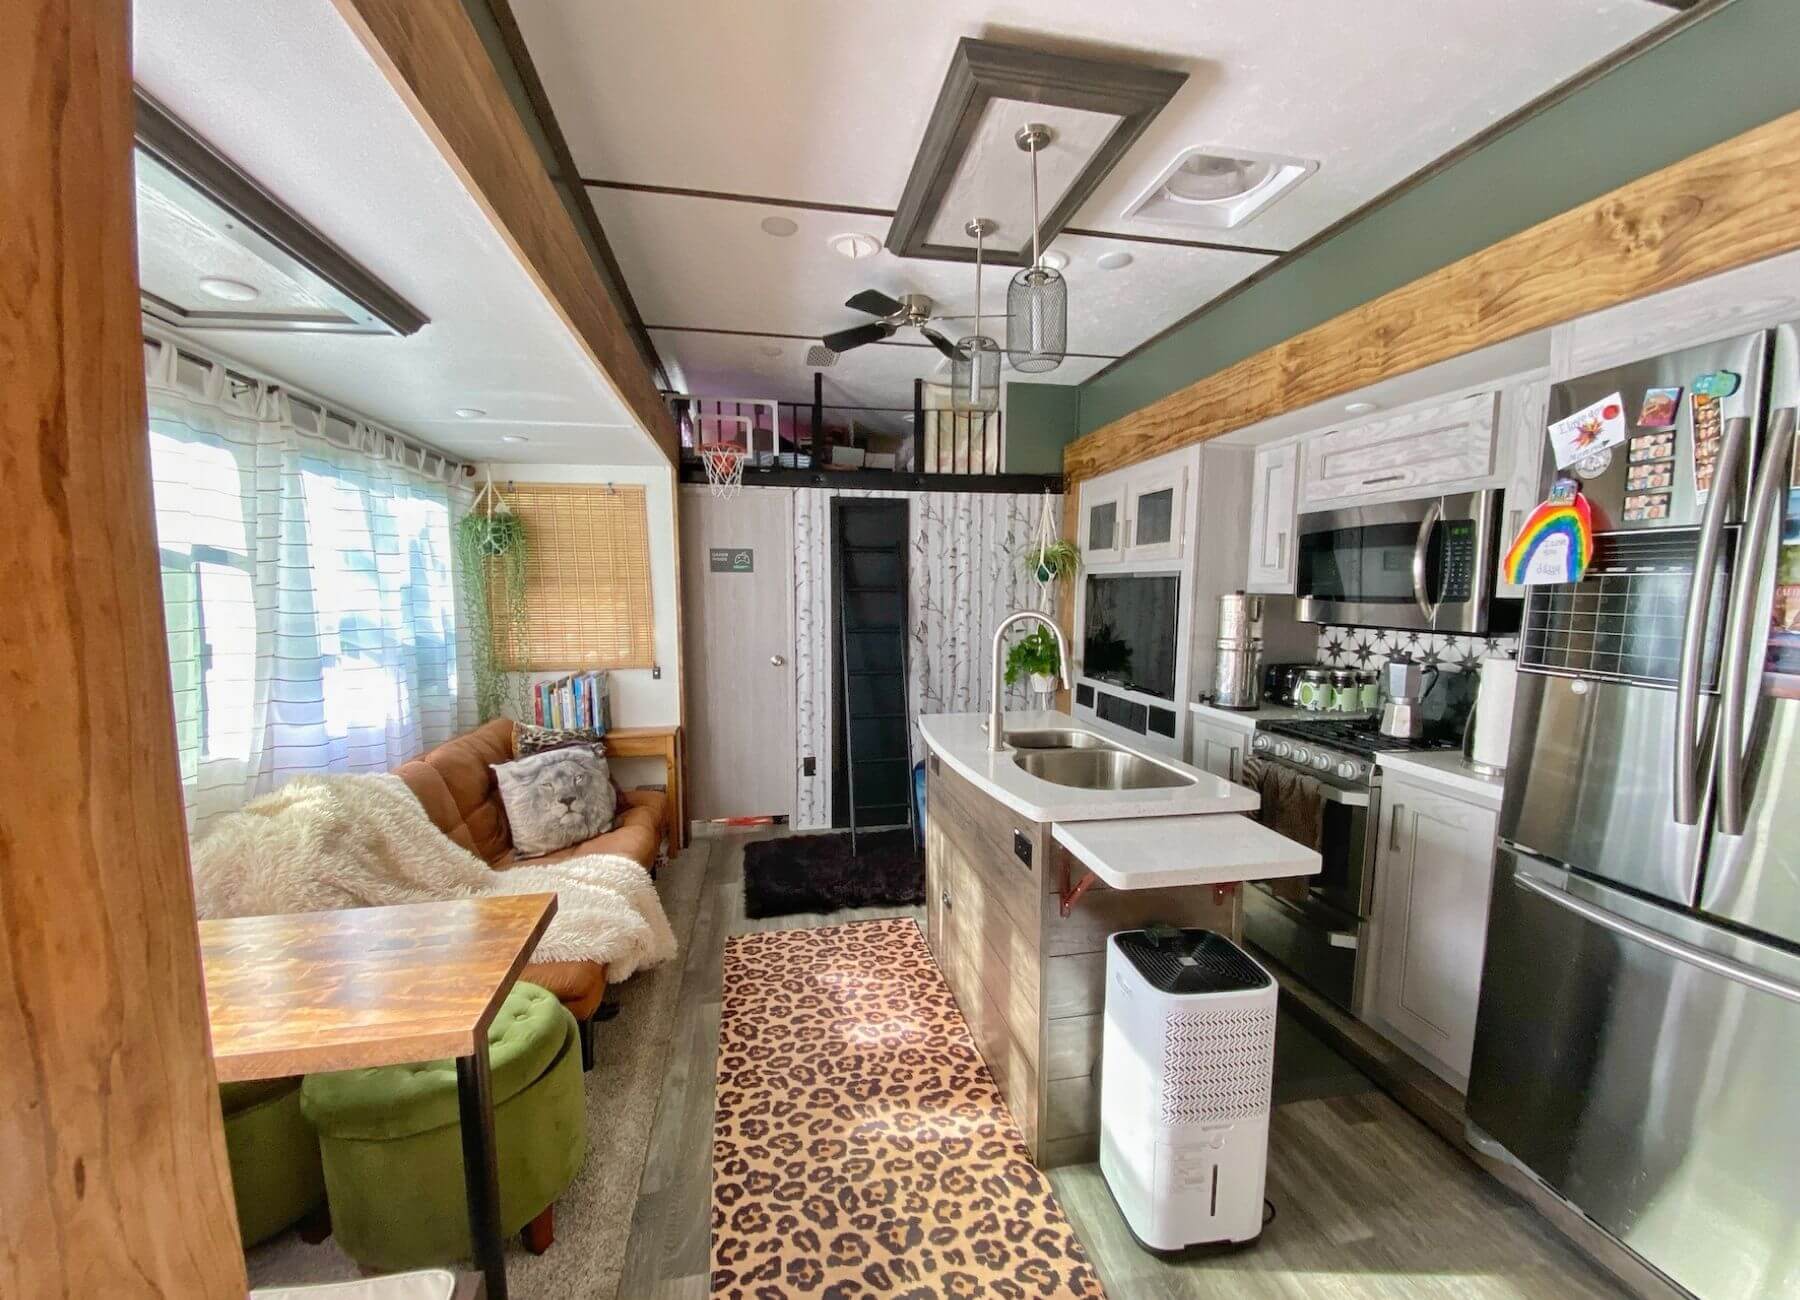 Fun And Simple RV Remodel Ideas For Your 5th Wheel